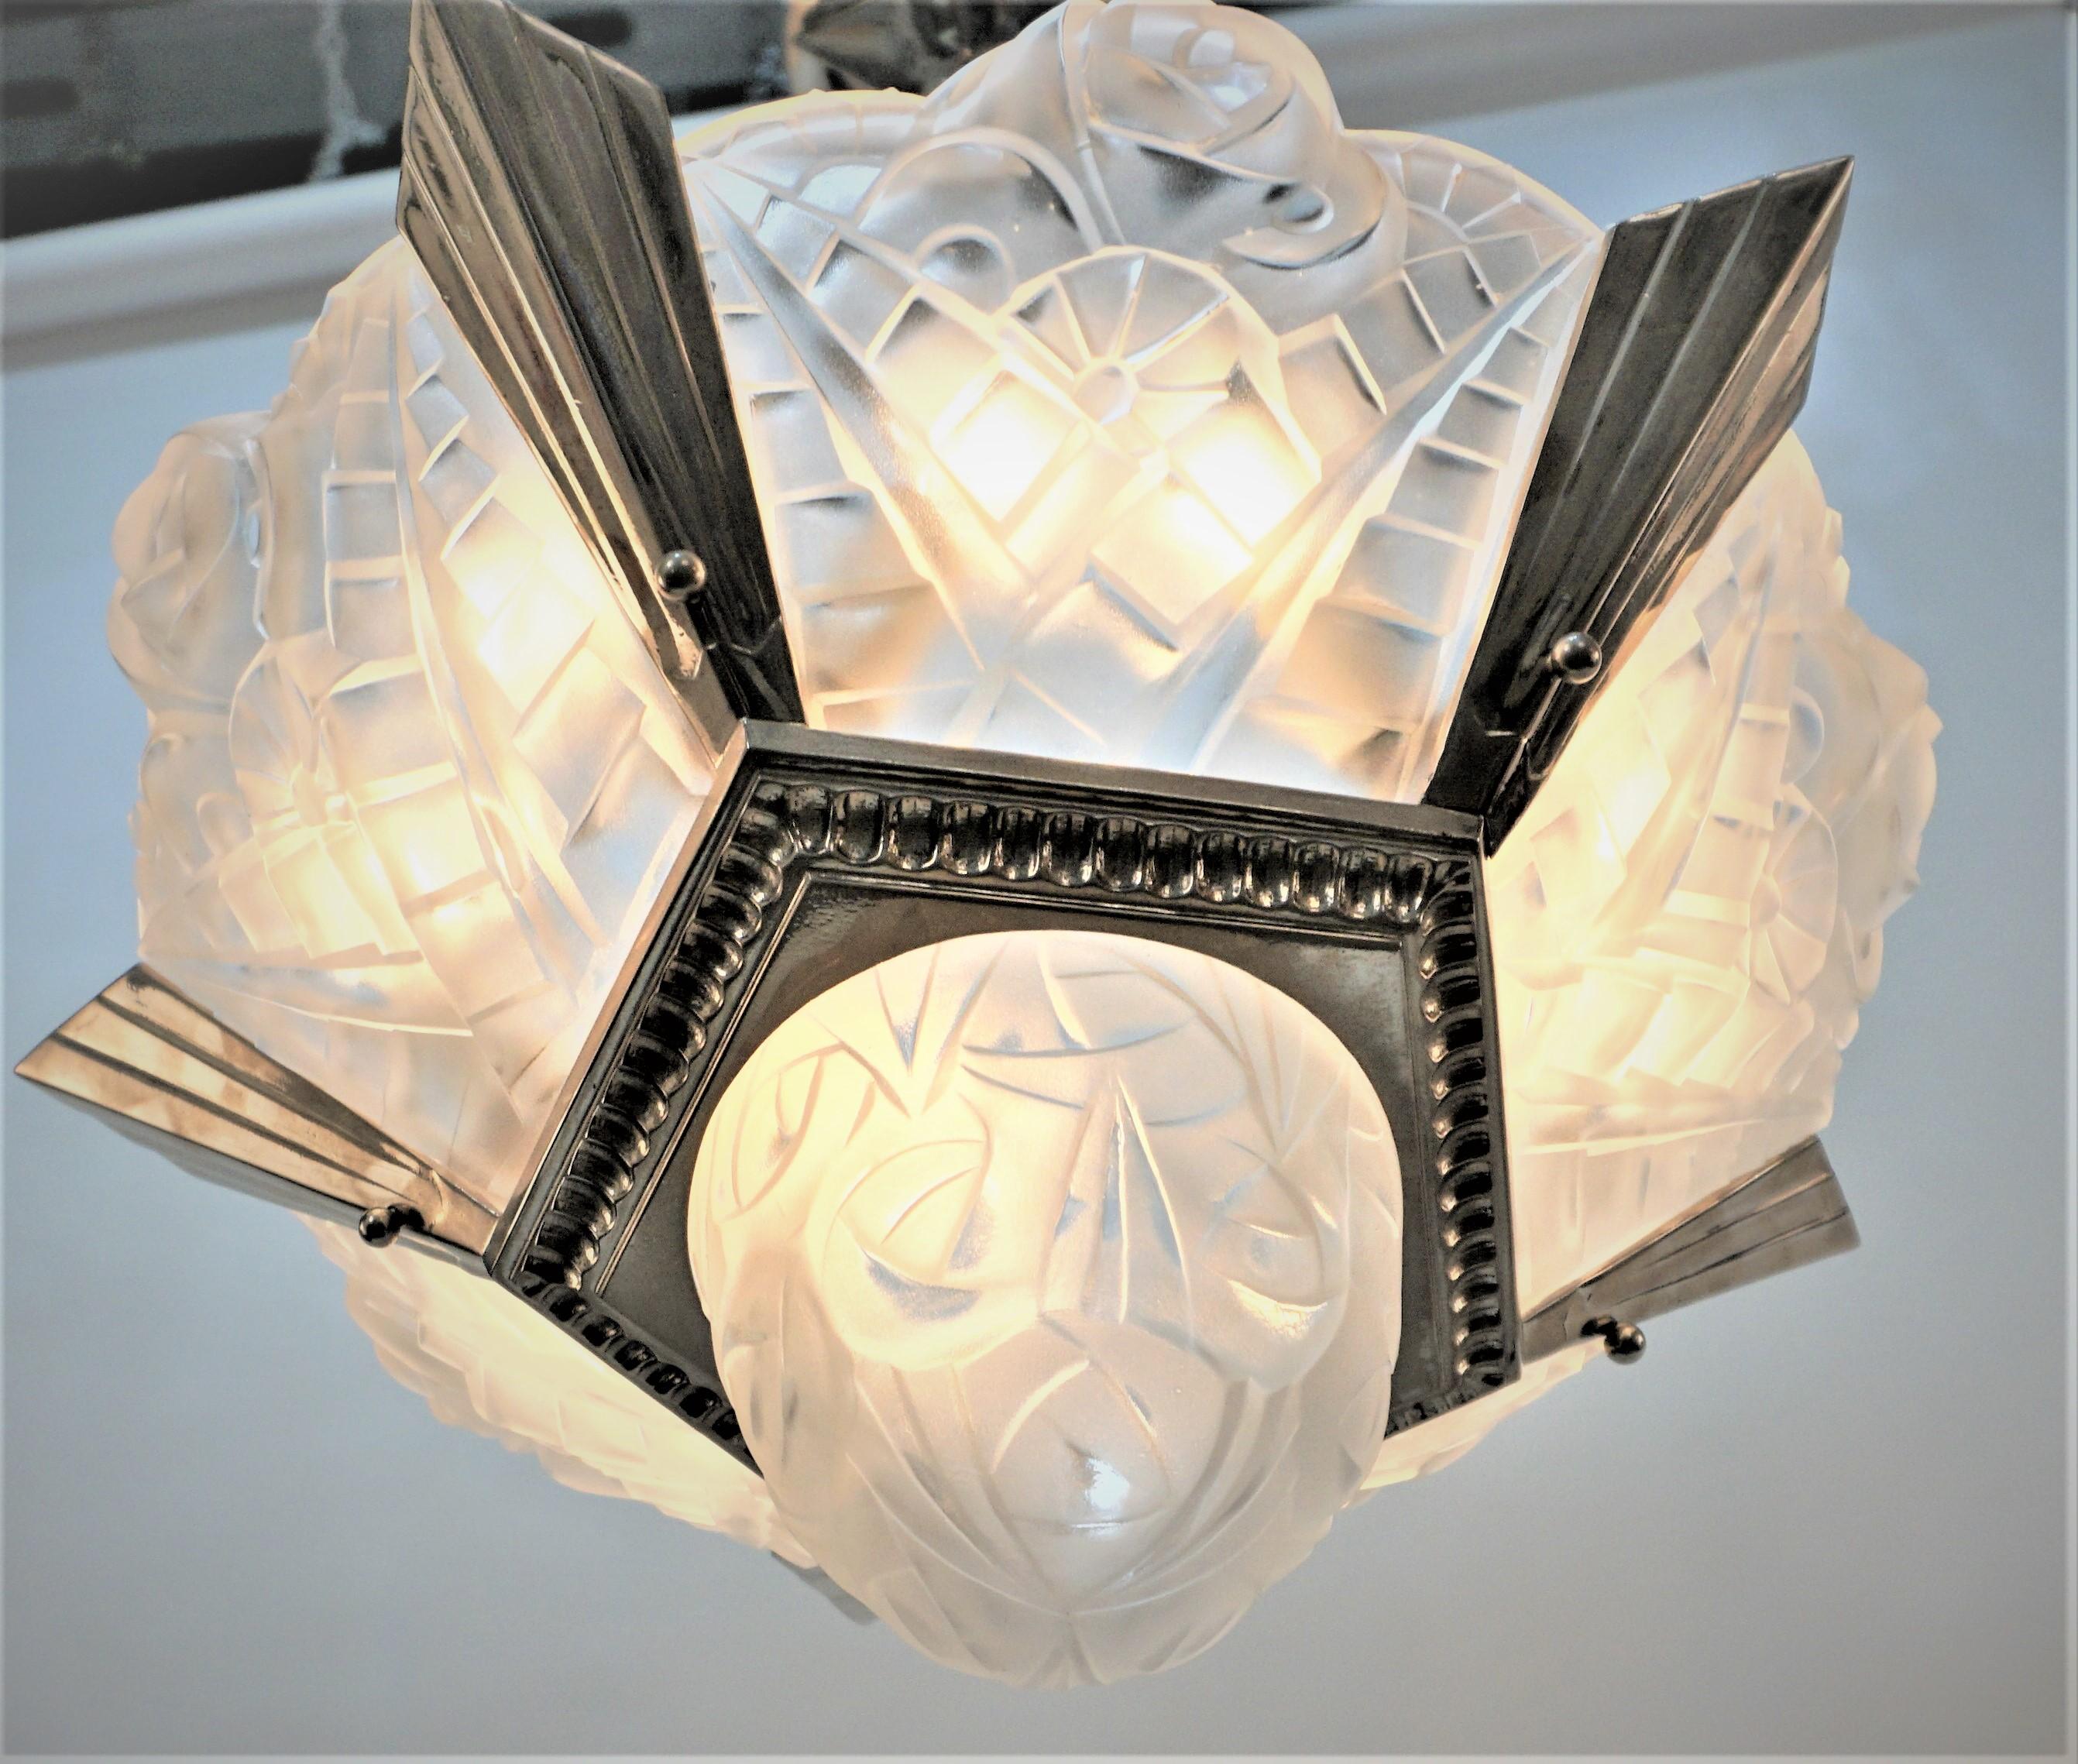 Clear frost geometric flora design glass with nickel on bronze frame art deco chandelier with eleven lights.